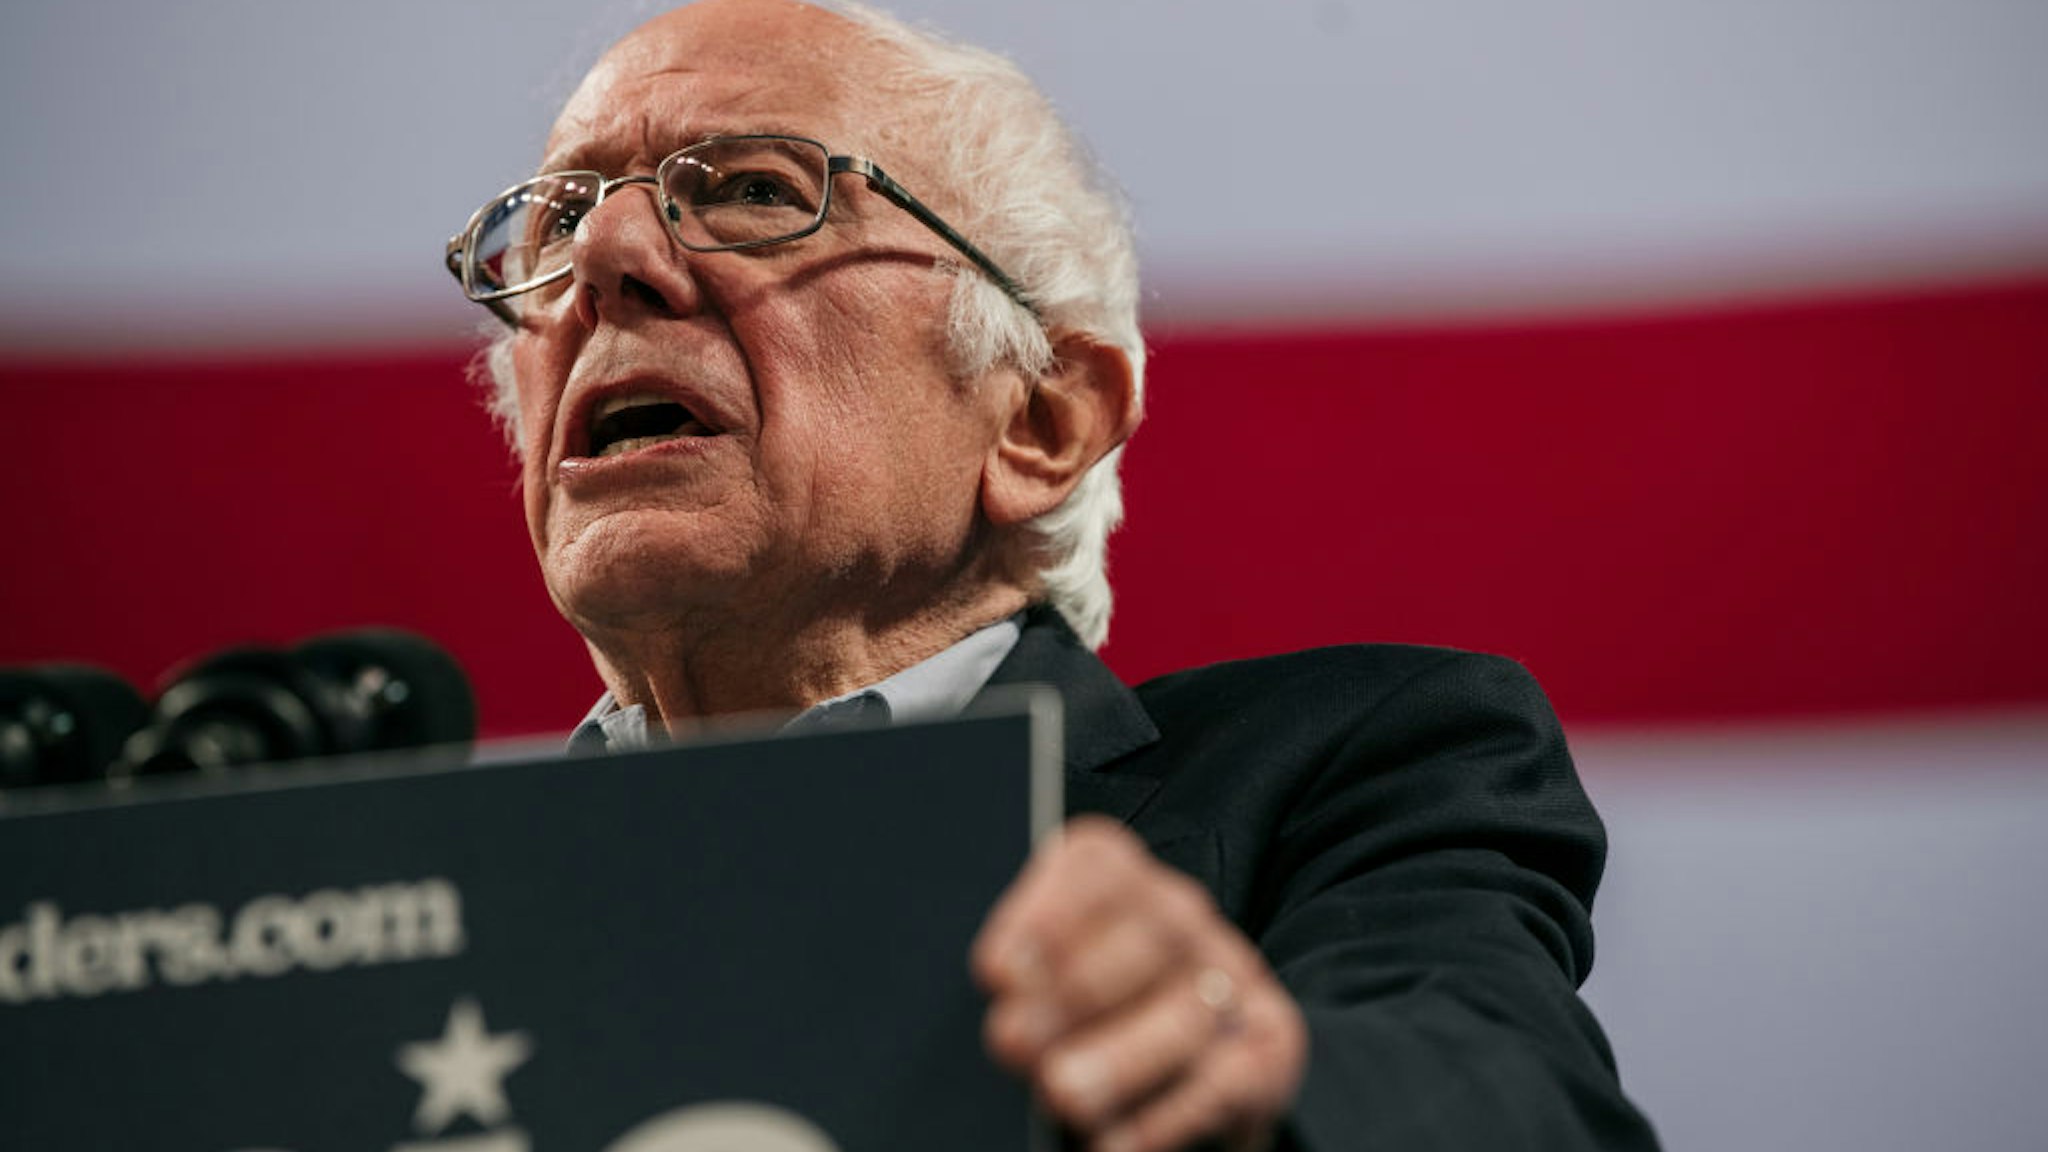 MINNEAPOLIS, MN - NOVEMBER 03: Democratic presidential candidate Sen. Bernie Sanders (I-VT) speaks at a campaign rally at the University of Minnesotas Williams Arena on November, 3, 2019 in Minneapolis, Minnesota. Over 10,000 people attended the rally, where Sanders was joined by Democratic Representative Ilhan Omar.